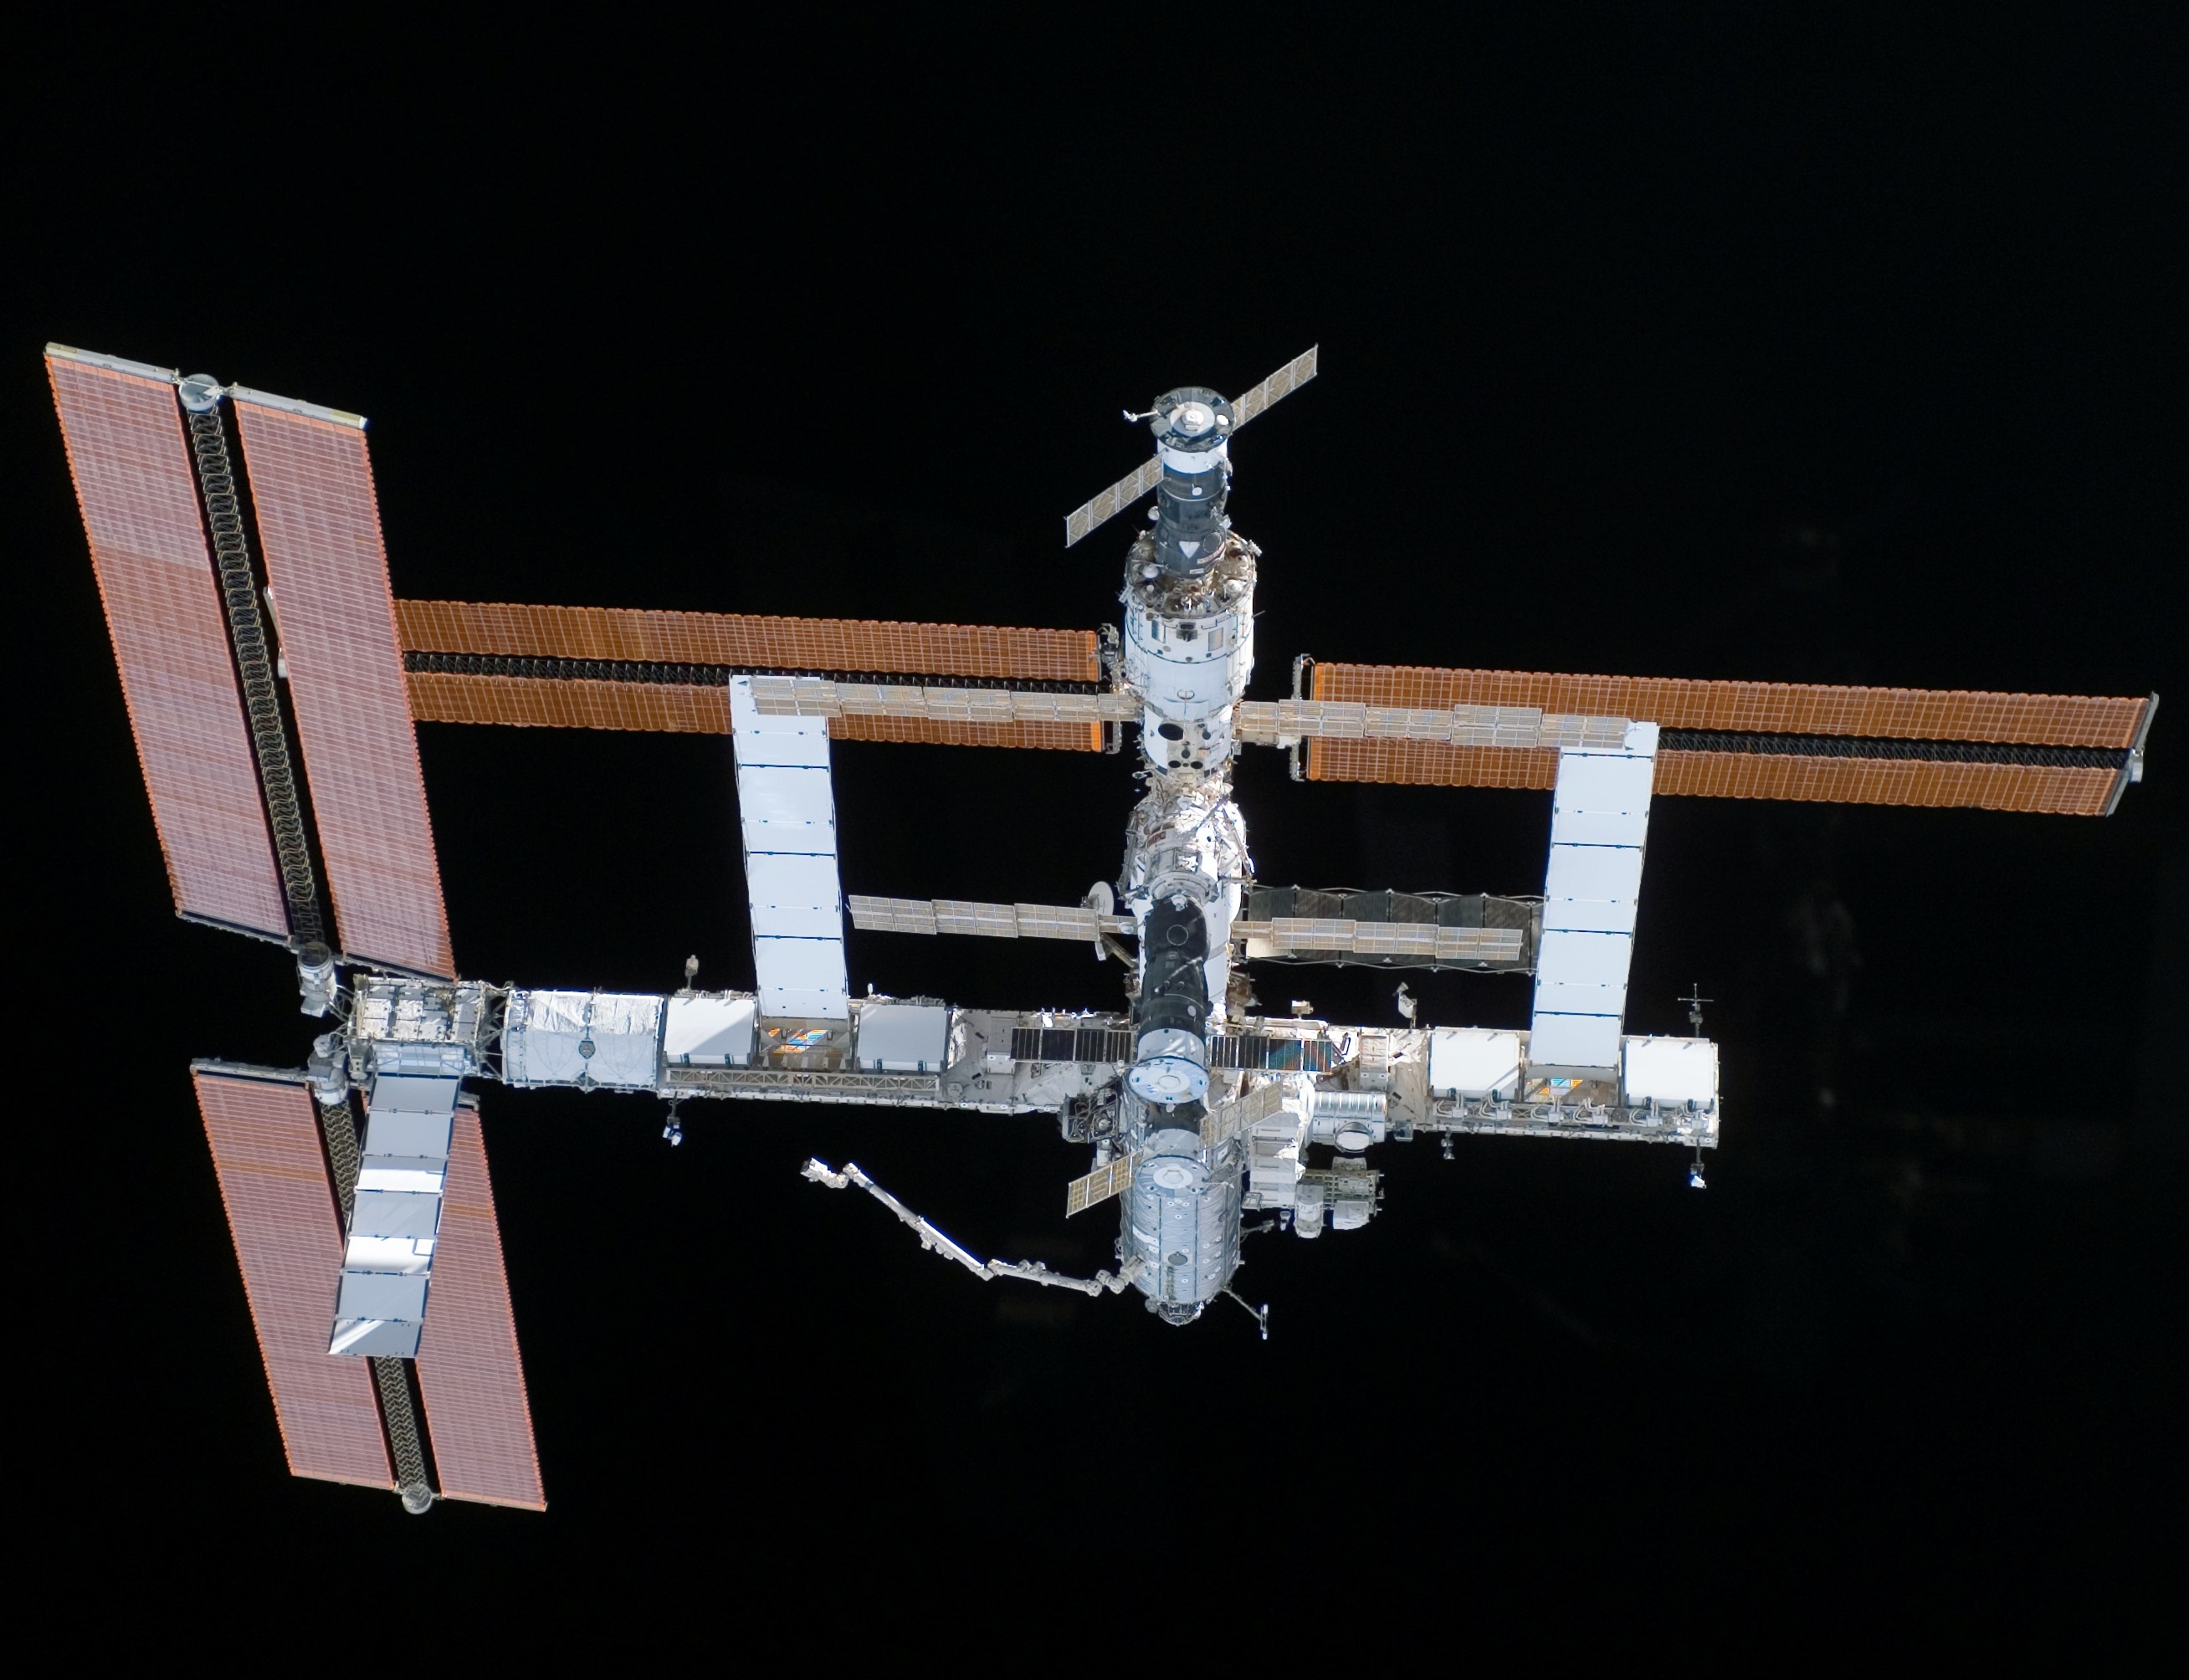 Space station configuration when NASA astronaut Michael E. Lopez-Alegria arrived in September 2006